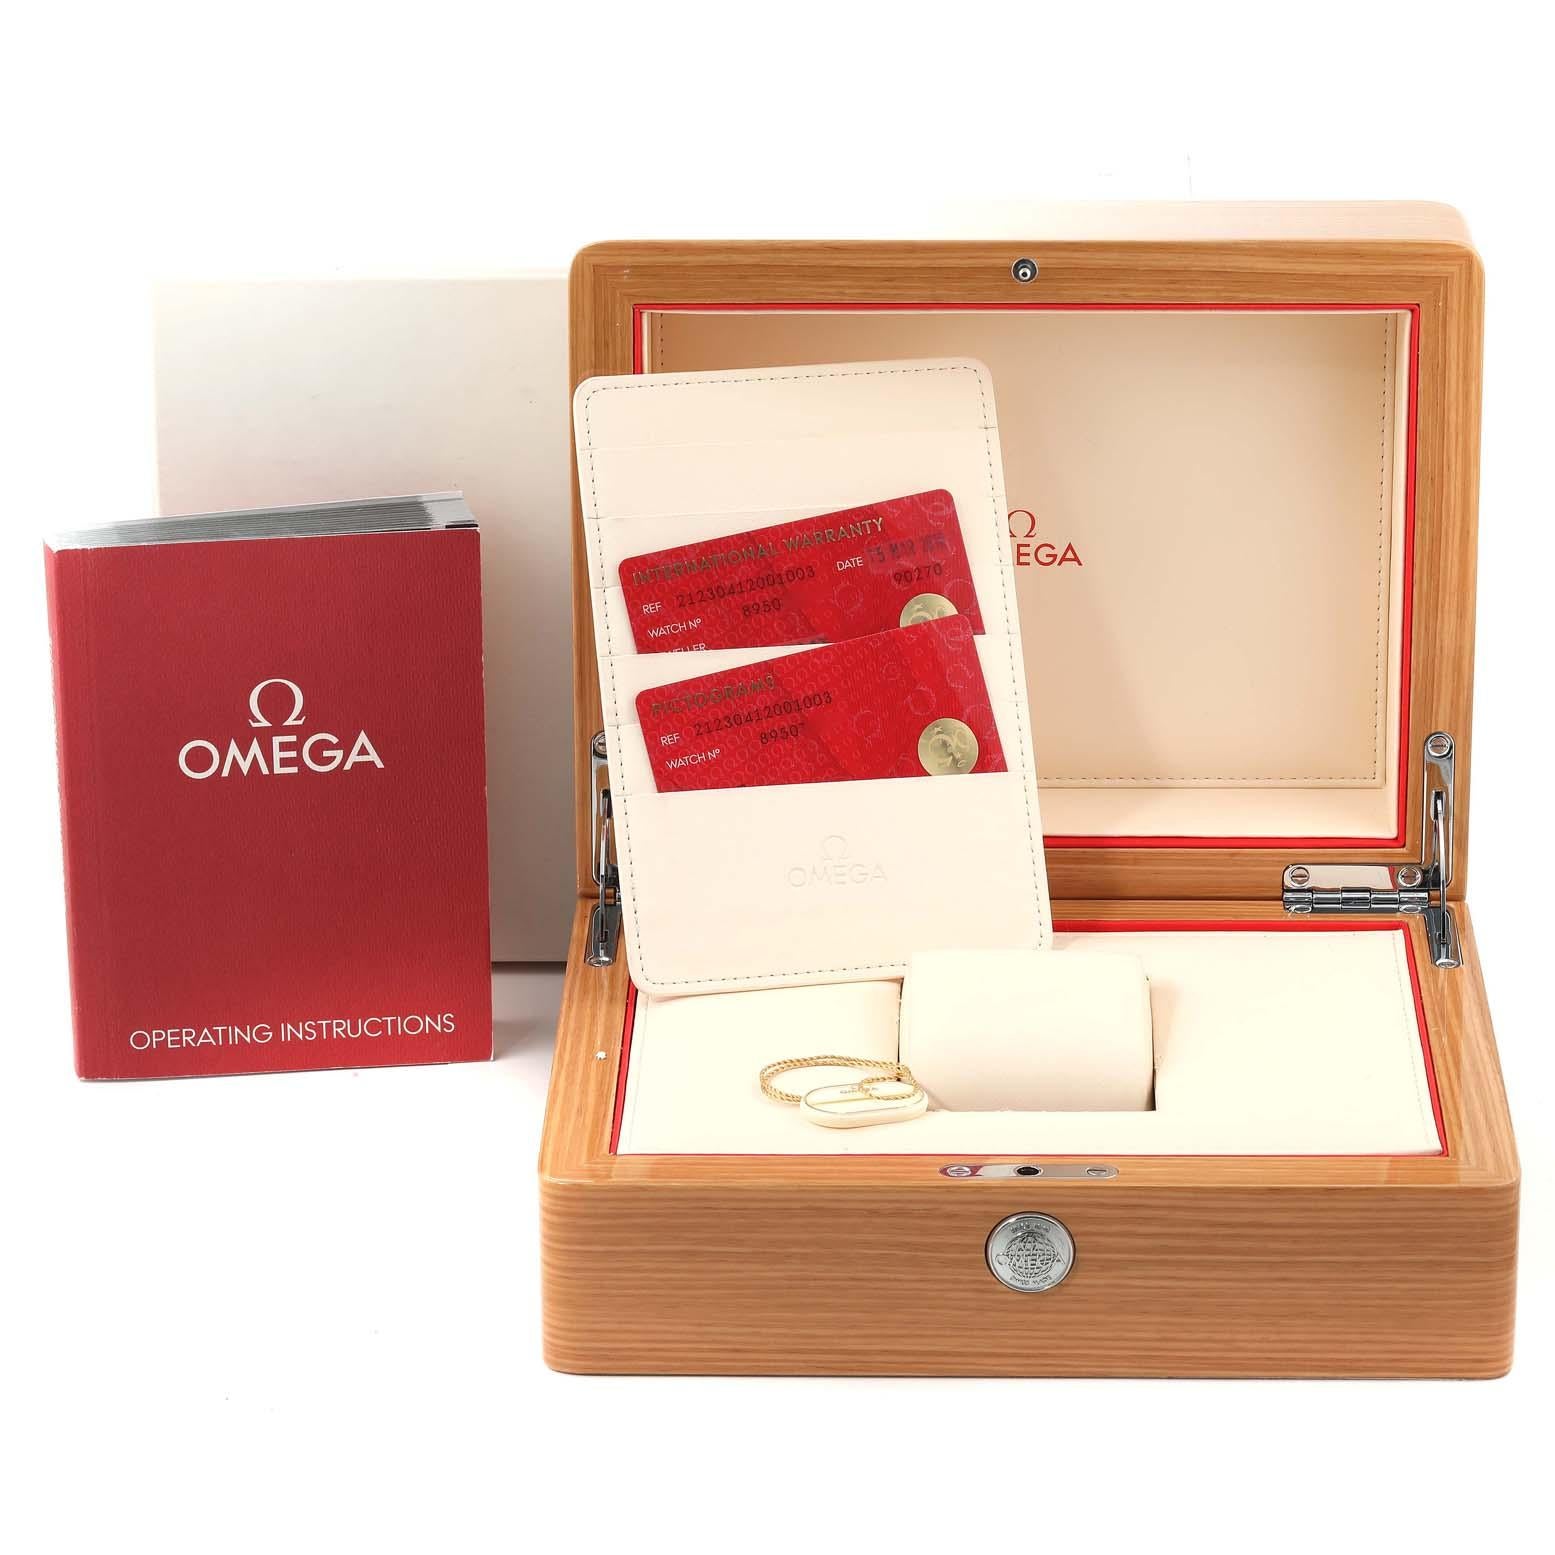 Omega Seamaster Diver 300M Steel Mens Watch 212.30.41.20.01.003 Box Card 6